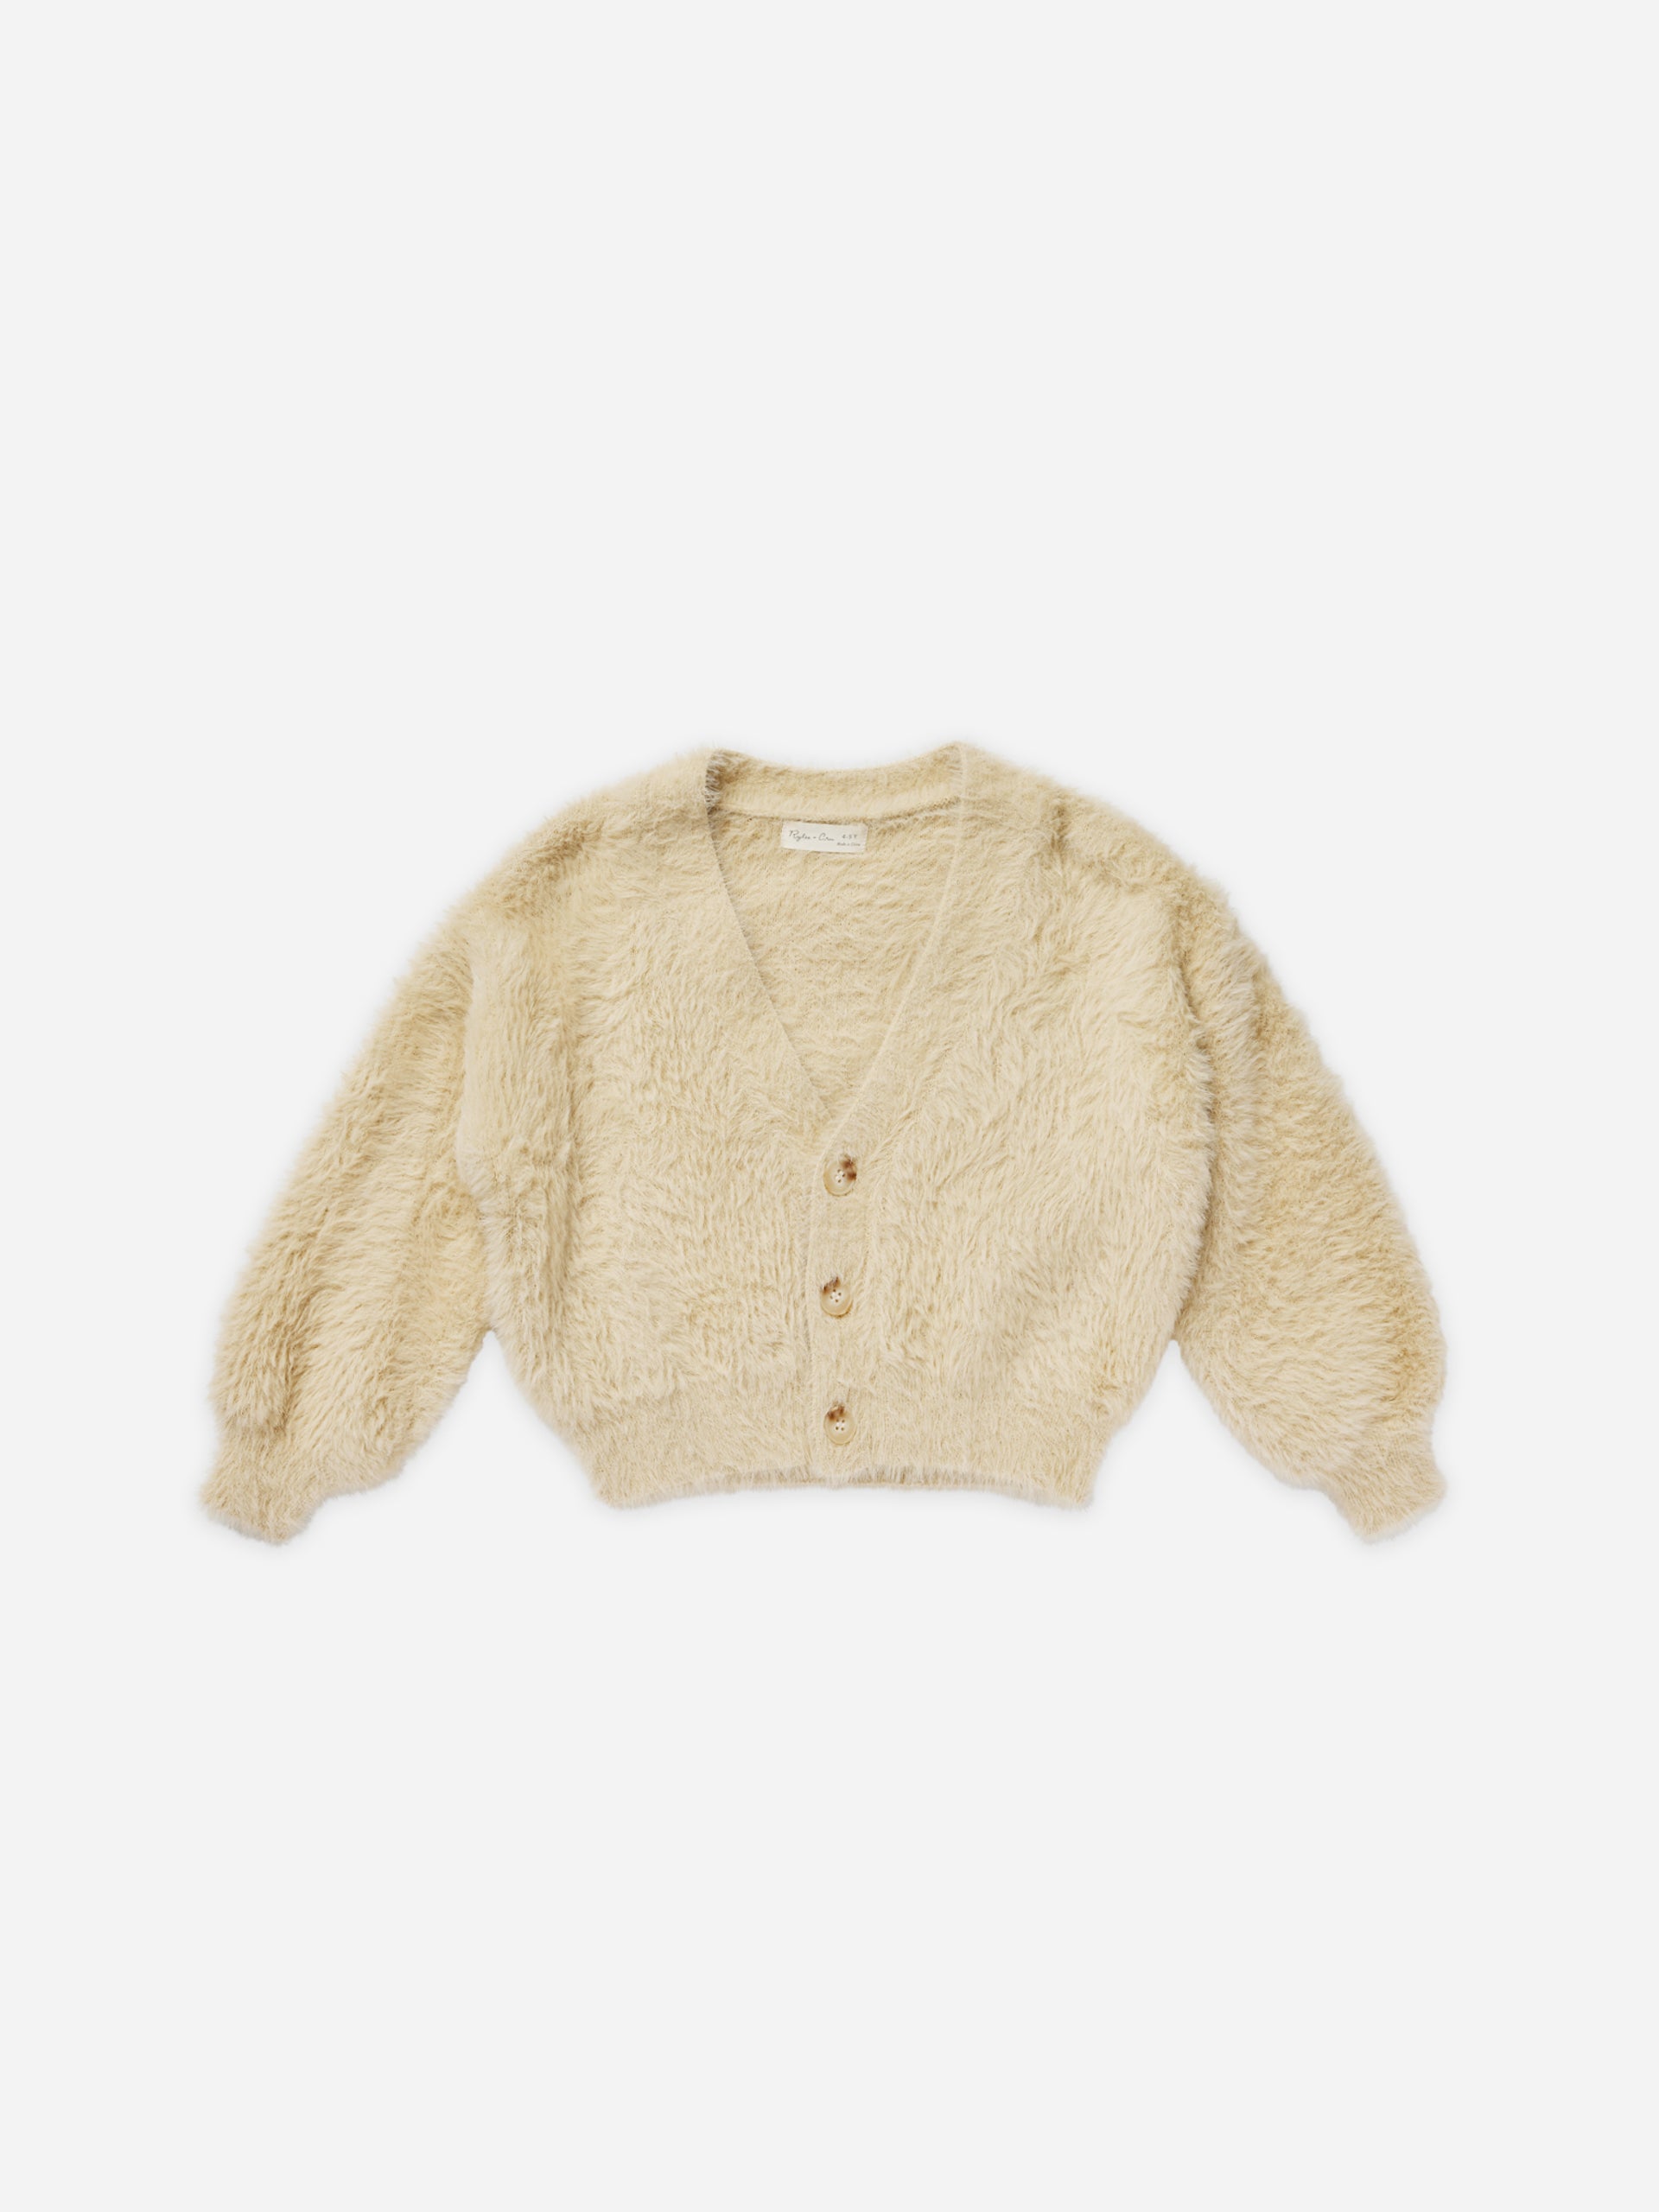 Boxy Crop Cardigan || Champagne - Rylee + Cru | Kids Clothes | Trendy Baby Clothes | Modern Infant Outfits |